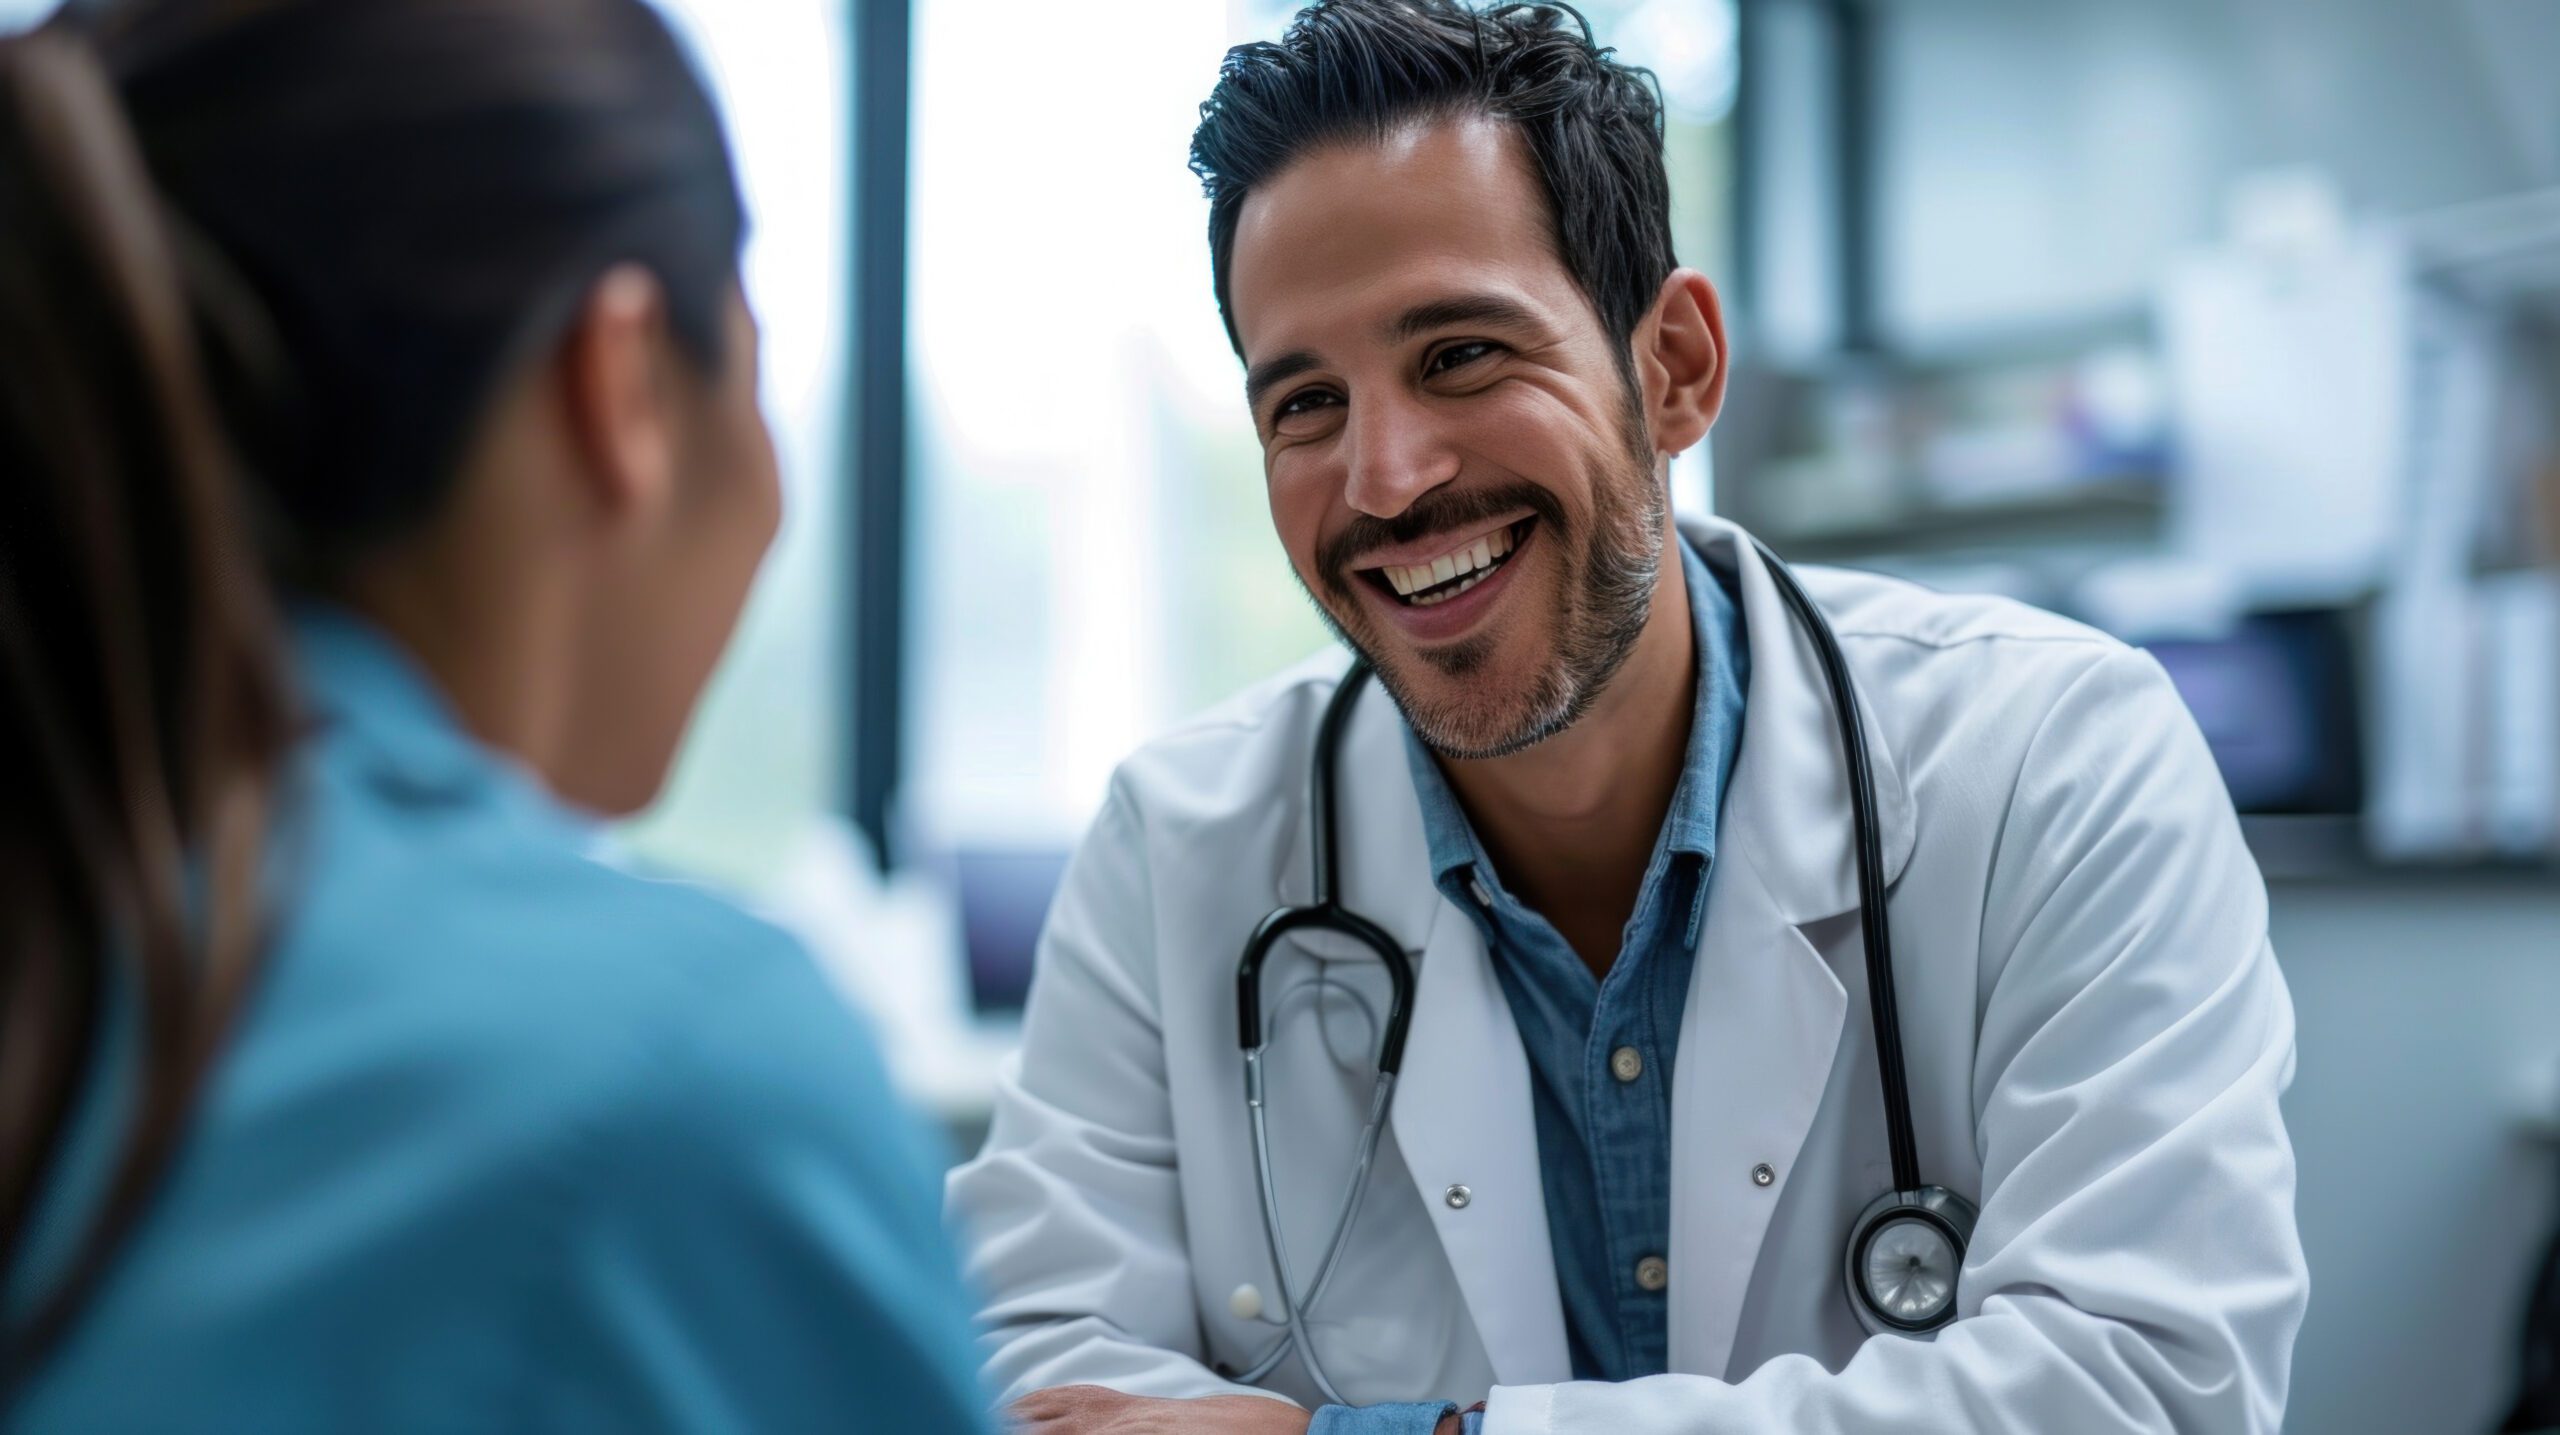 A smiling mid adult male doctor listens as a female patient discusses her health